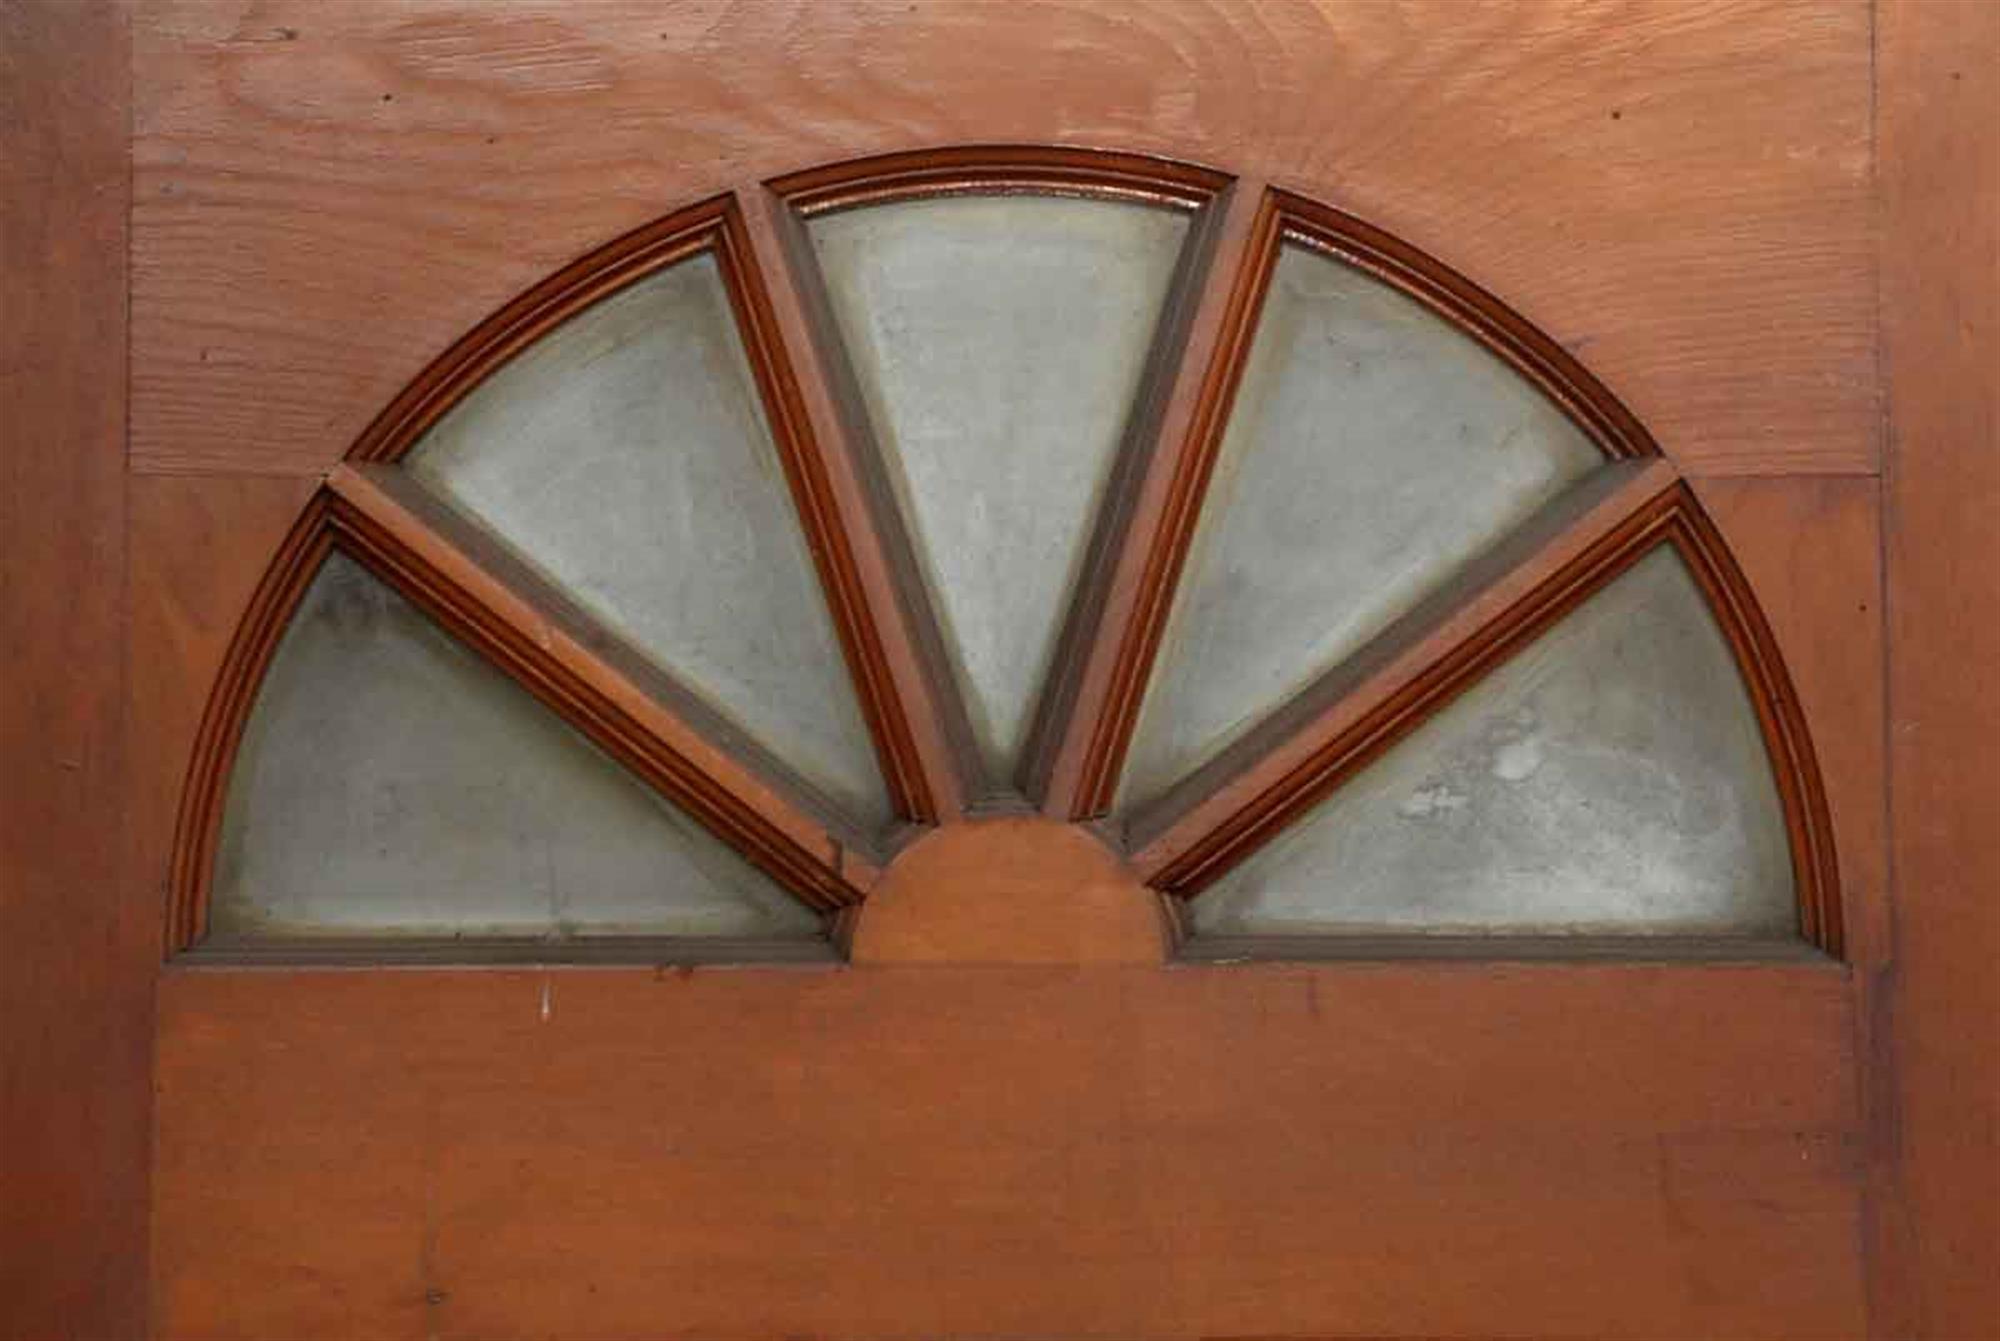 1930s medium wood tone entry door with glass fan shaped panes at the top and four wooden panels. Pleas note the surface mounted hinges indicative of this era. This can be seen at our 302 Bowery location in NoHo in Manhattan.